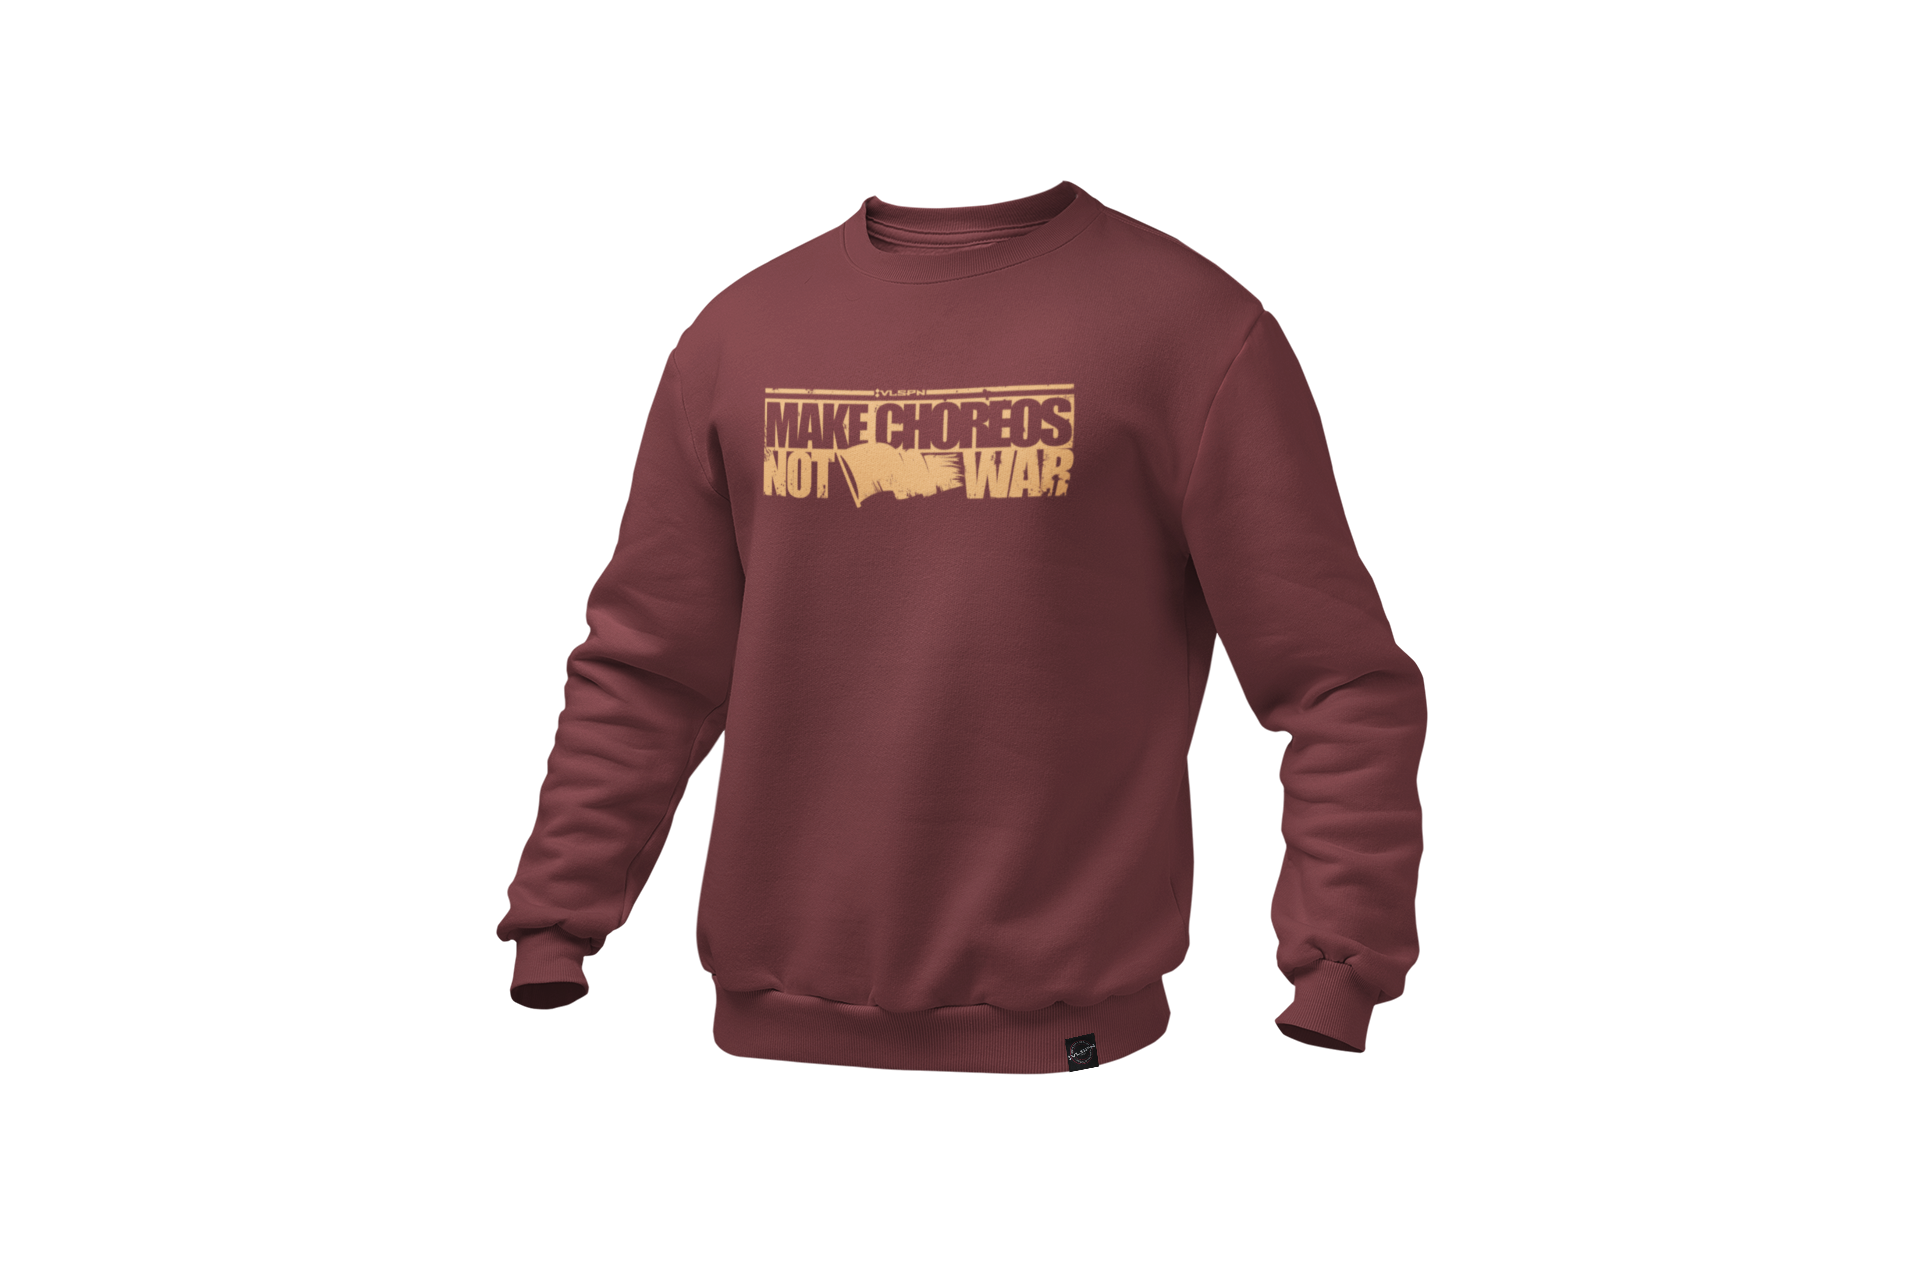 mockup-of-a-ghosted-crewneck-sweatshirt-over-a-solid-background-26960 (95).png